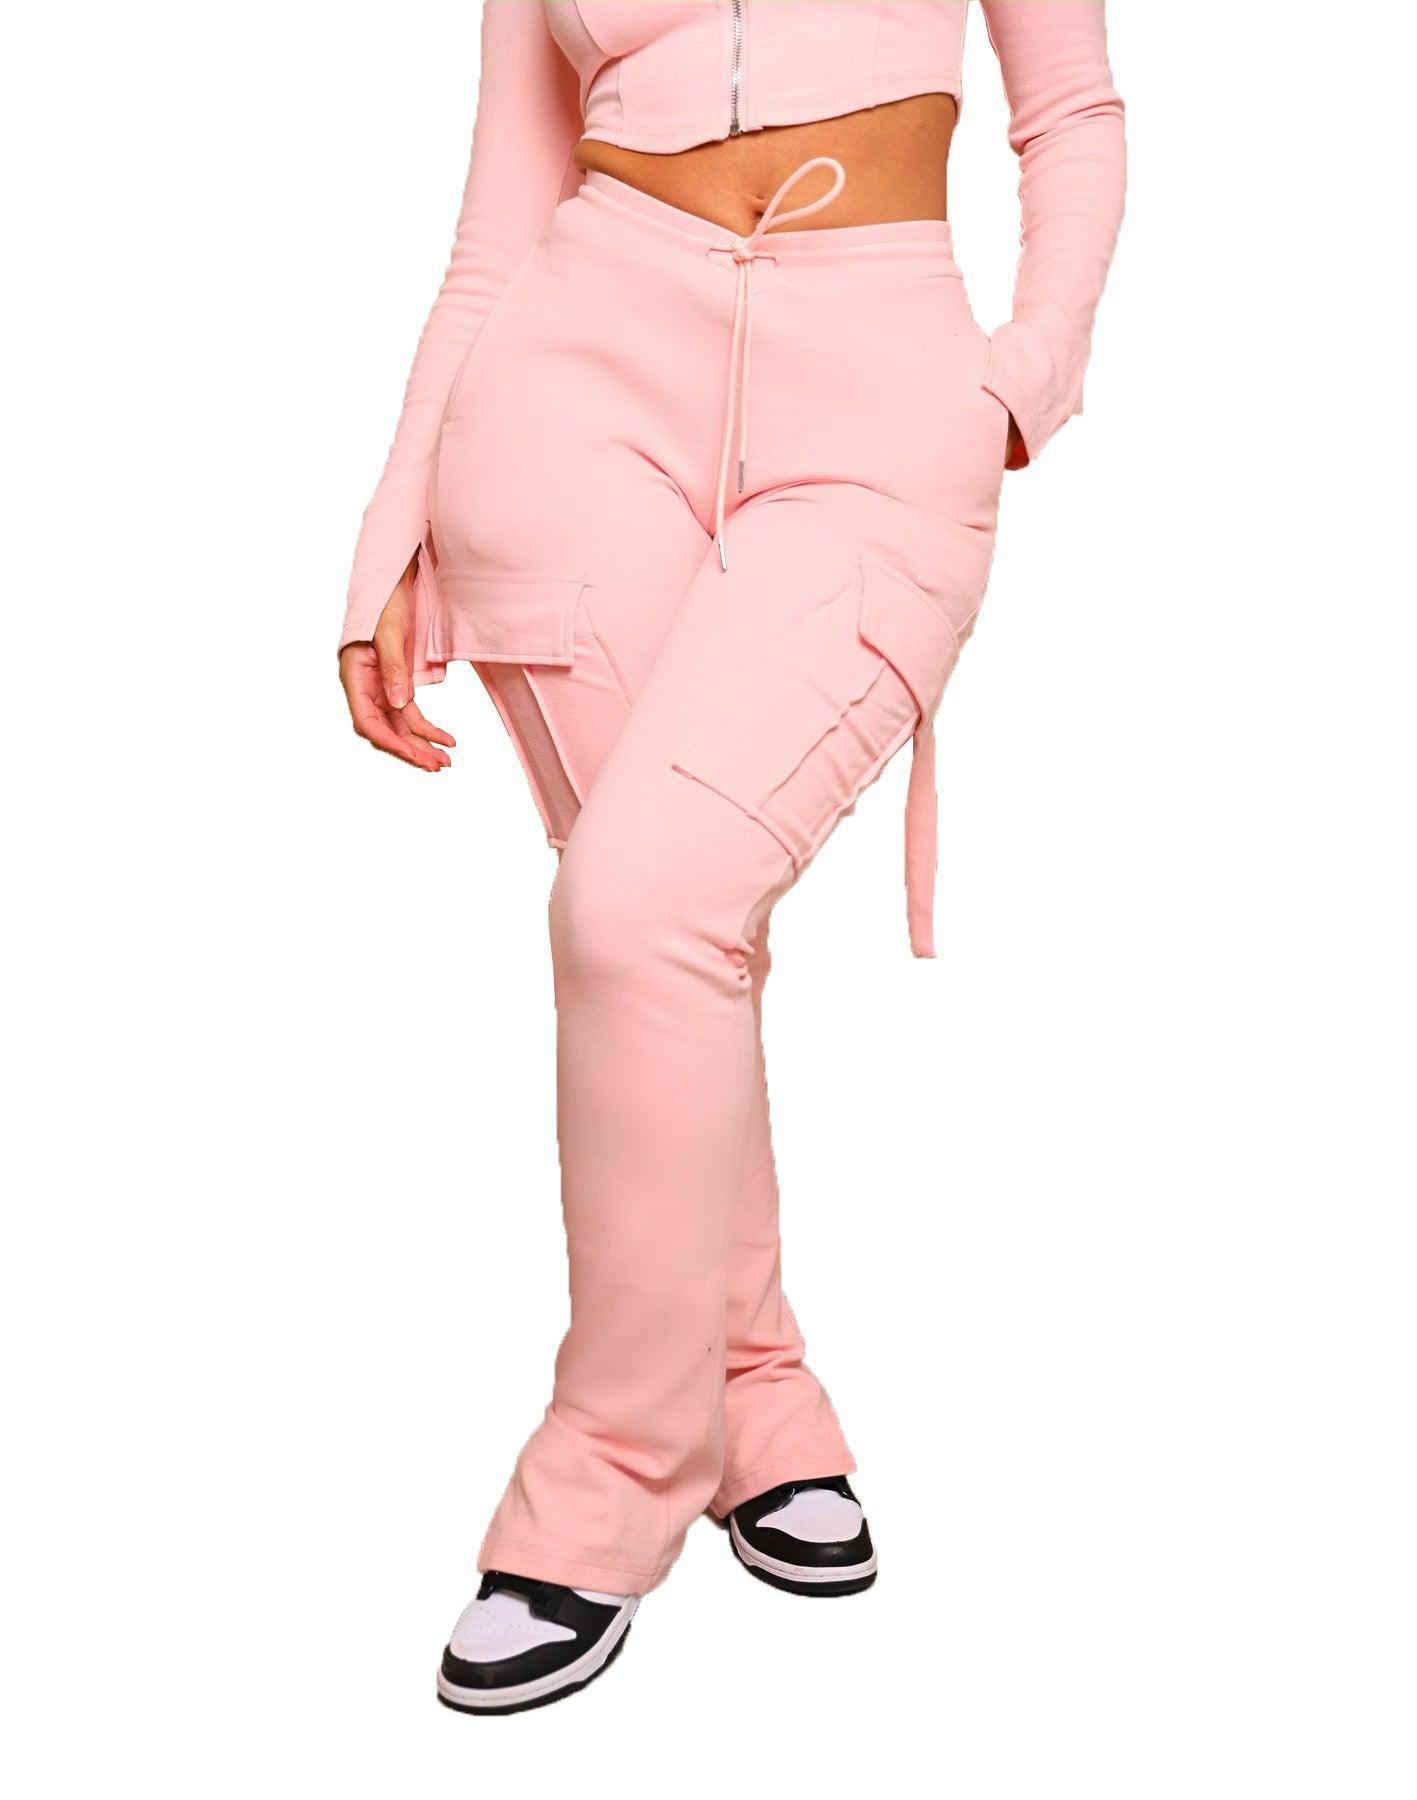 Women's Casual Tight Sportswear Multi-pocket Overalls With-Pink pants-18